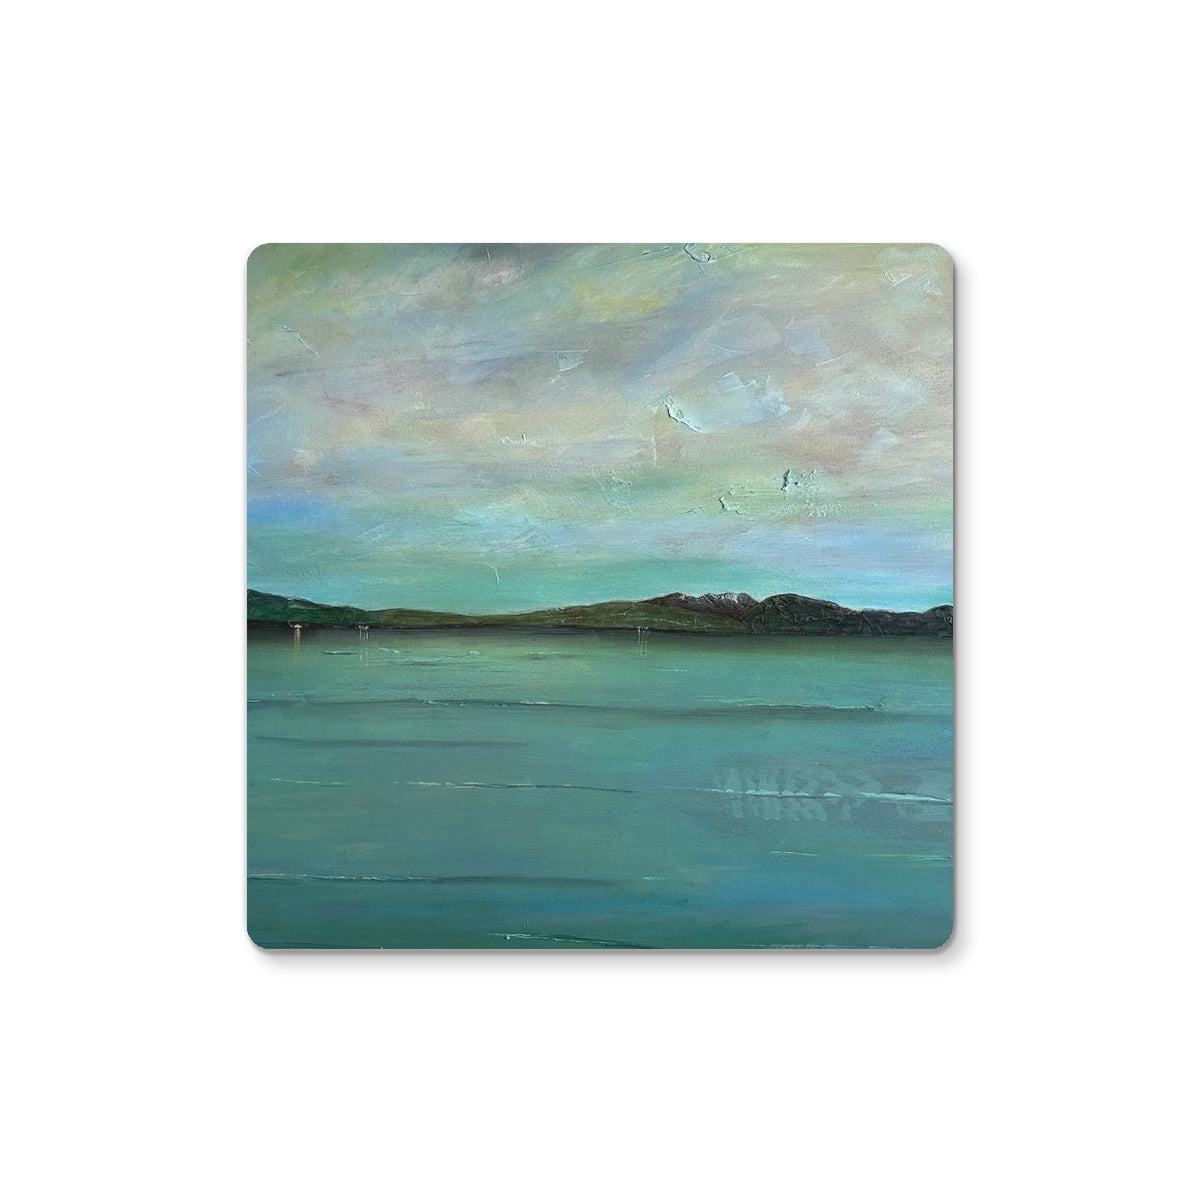 An Ethereal Loch Lomond Art Gifts Coaster-Coasters-Scottish Lochs & Mountains Art Gallery-2 Coasters-Paintings, Prints, Homeware, Art Gifts From Scotland By Scottish Artist Kevin Hunter